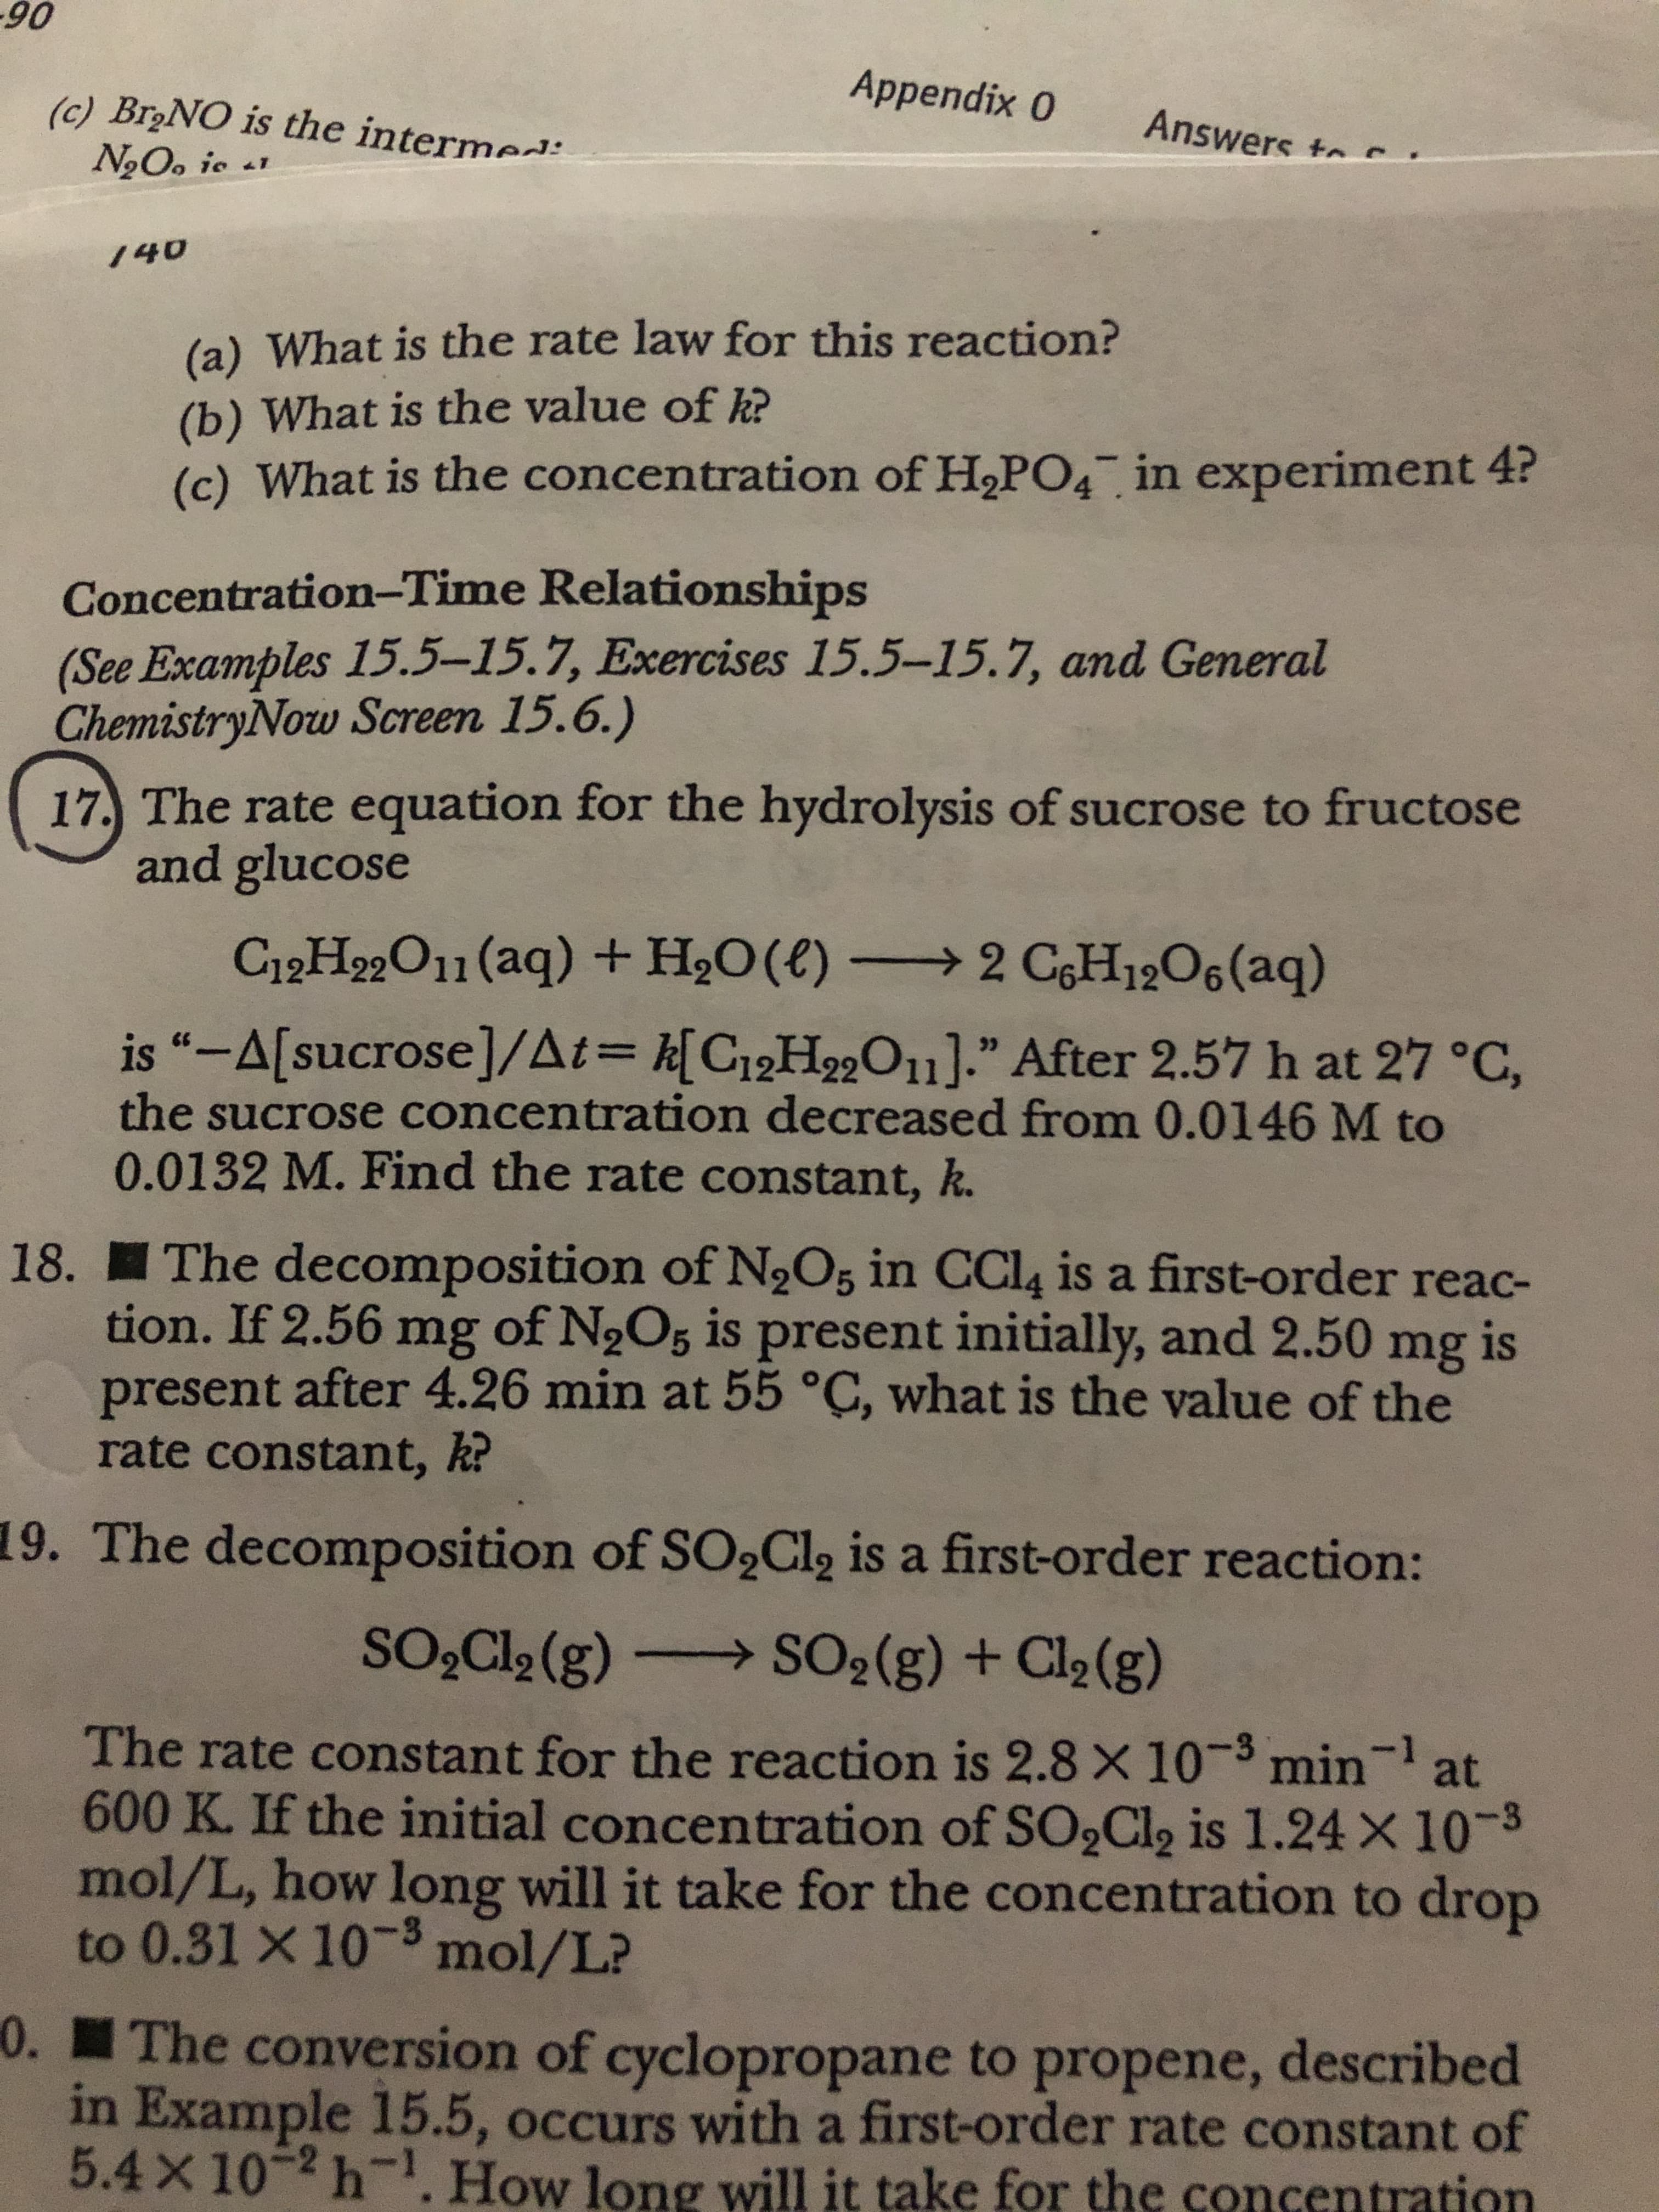 90
(c) BroNO is the intermed:
Appendix 0
Answers tor
NgO. ic 41
140
(a) What is the rate law for this reaction?
(b) What is the value of kR
(c) What is the concentration of H,PO4 in experiment 4?
Concentration-Time Relationships
(See Examples 15.5-15.7, Exercises 15.5-15.7, and General
ChemistryNow Screen 15.6.)
17. The rate equation for the hydrolysis of sucrose to fructose
and glucose
C12H99O11 (aq) + H2O(€) → 2 CH12O6(aq)
is “-A[sucrose]/At= k[C12H22O11]." After 2.57 h at 27 °C,
the sucrose concentration decreased from 0.0146 M to
0.0132 M. Find the rate constant, k.
18. The decomposition of N2O5 in CCI4 is a first-order reac-
tion. If 2.56 mg of N2O5 is present initially, and 2.50 mg is
present after 4.26 min at 55 °C, what is the value of the
rate constant, k?
19. The decomposition of SO,Cl, is a first-order reaction:
SO,Cl2 (g)-
SO2(g) + Cl2(g)
The rate constant for the reaction is 2.8× 10-3 min
min-1
at
600 K. If the initial concentration of SO,Cl, is 1.24 × 10-3
mol/L, how long will it take for the concentration to drop
to 0.31 X 10-3 mol/L?
0. The conversion of cyclopropane to propene, described
in Example 15.5, occurs with a first-order rate constant of
5.4×10-2h.How long will it take for the concentration
